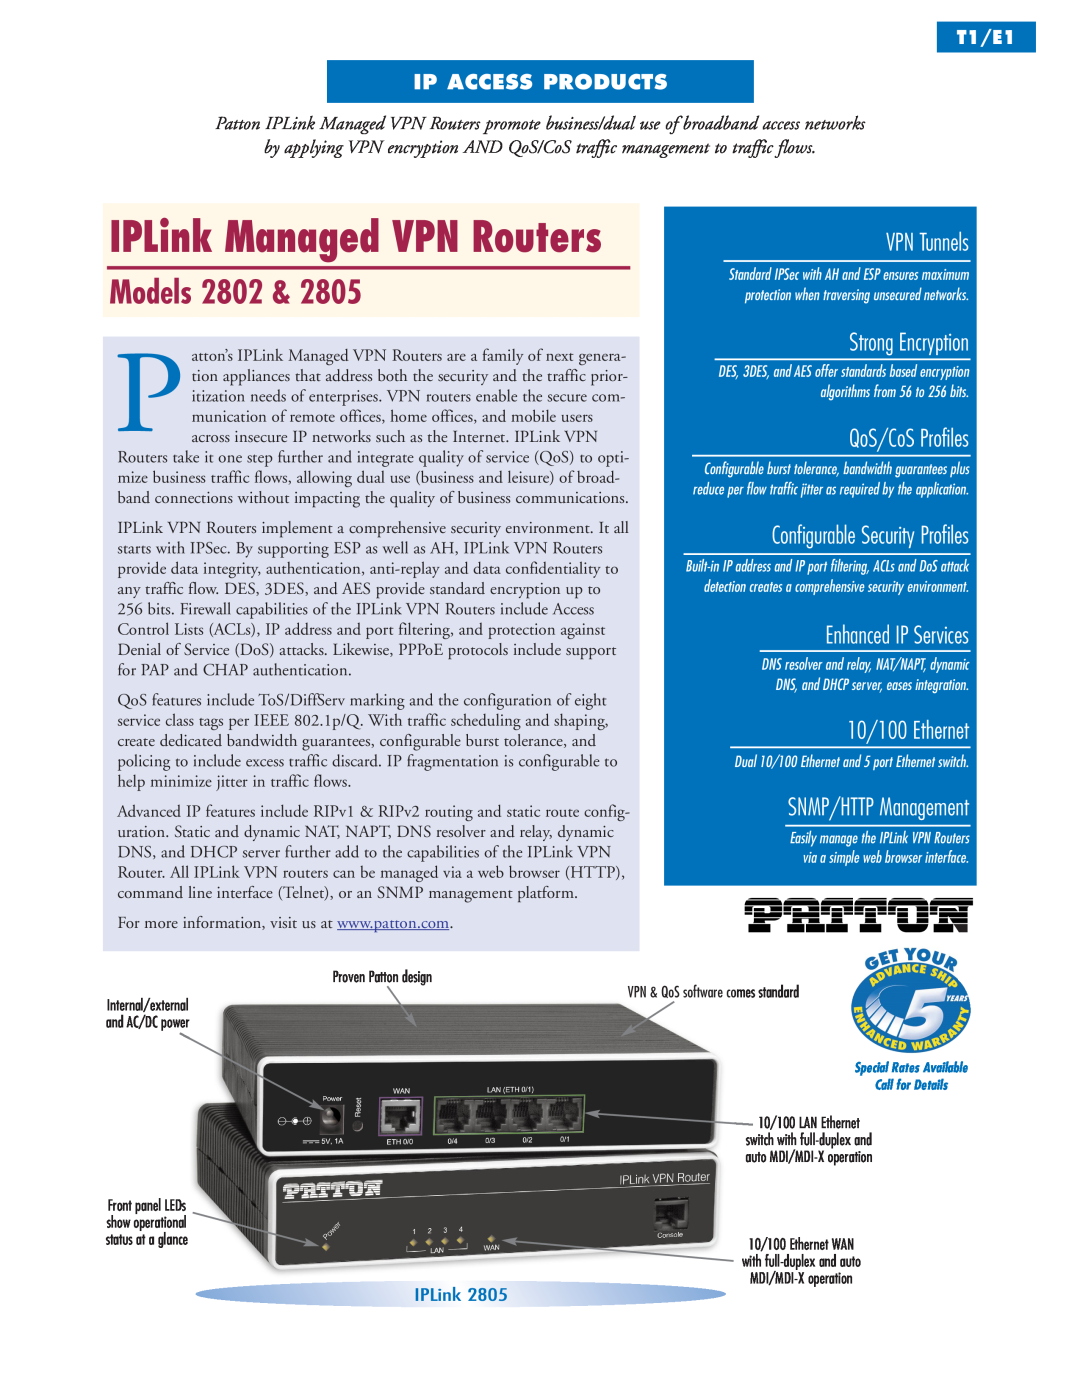 Patton electronic manual IPLink Managed VPN Routers, Models 2802, VPN Tunnels, Strong Encryption, QoS/CoS Profiles 